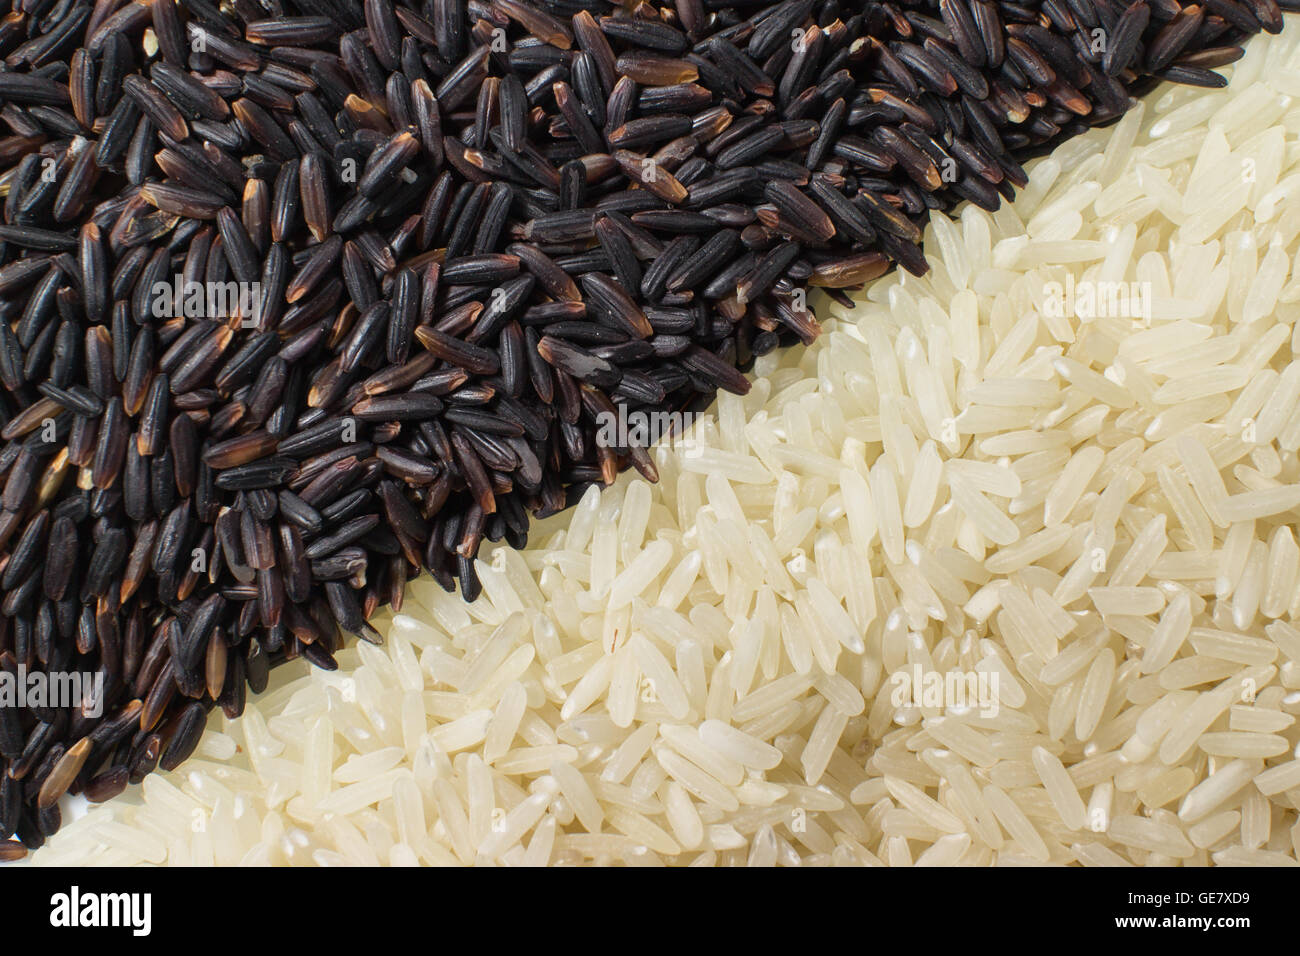 Food background with two rows of rice varieties : berry rice, white (jasmine) rice. Stock Photo